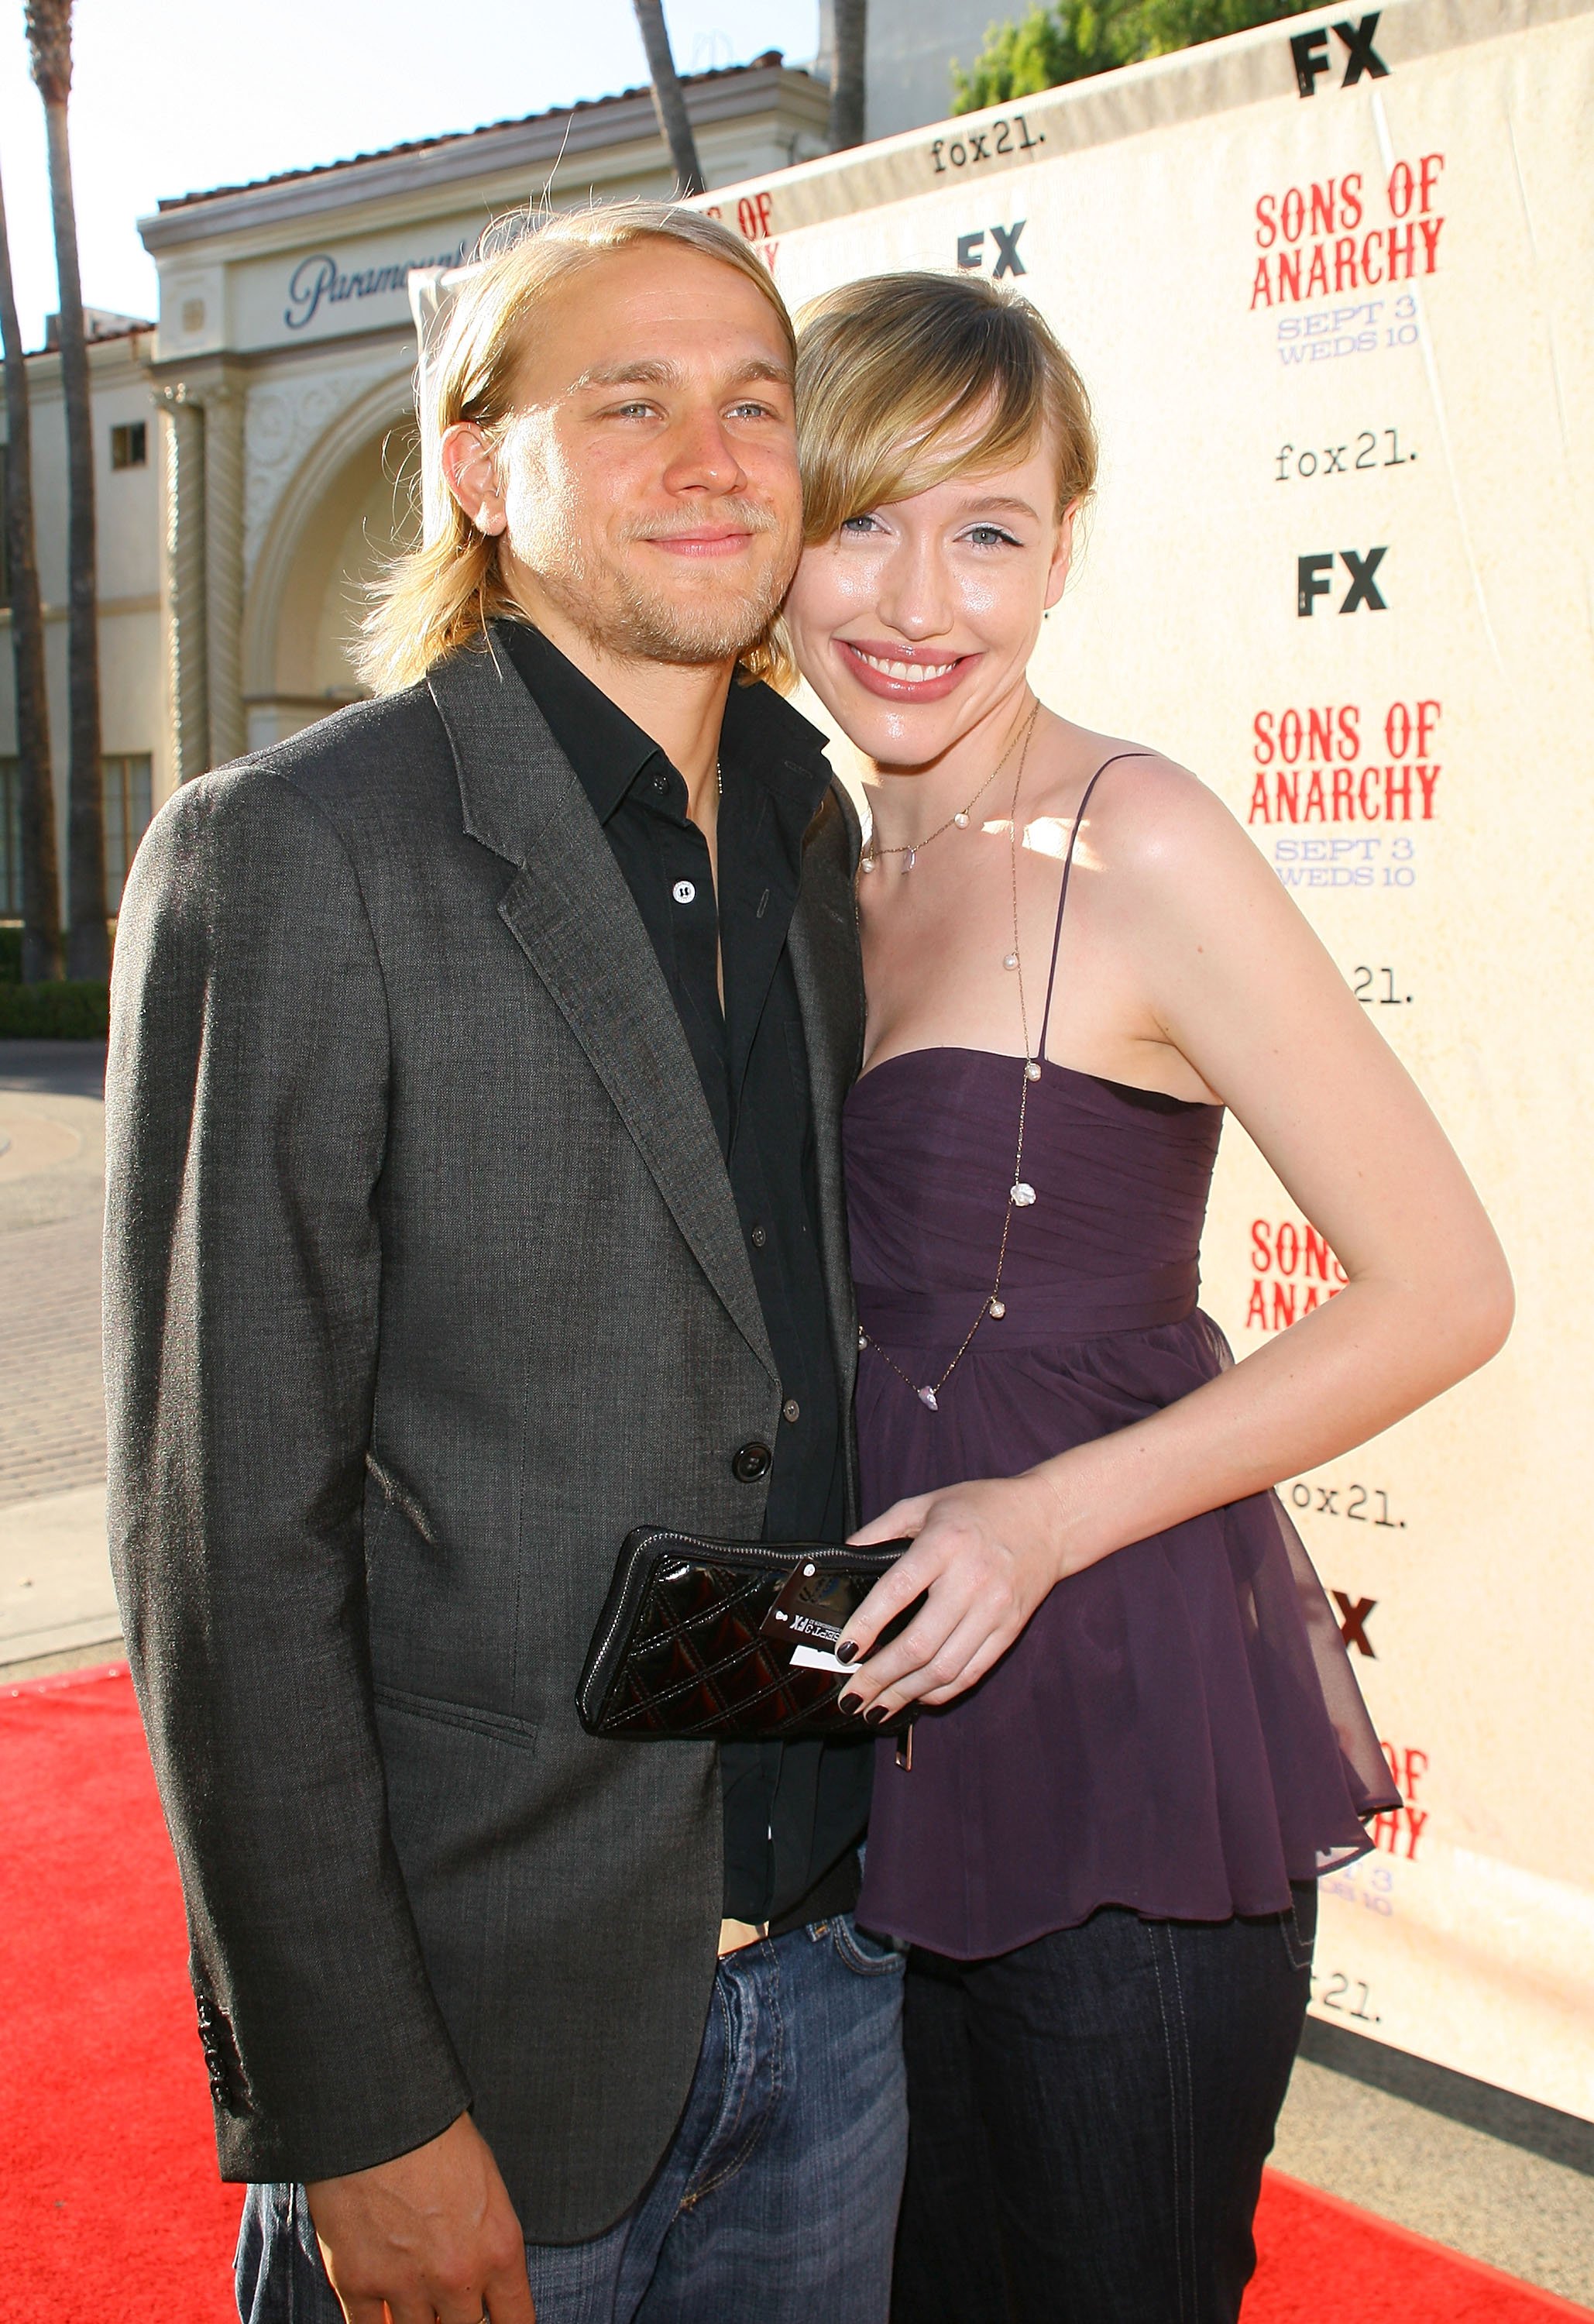 Charlie Hunnam and Morgana McNelis at the FX Series Screening of "Sons of Anarchy" on August 24, 2008, in Hollywood, California. | Source: Getty Images